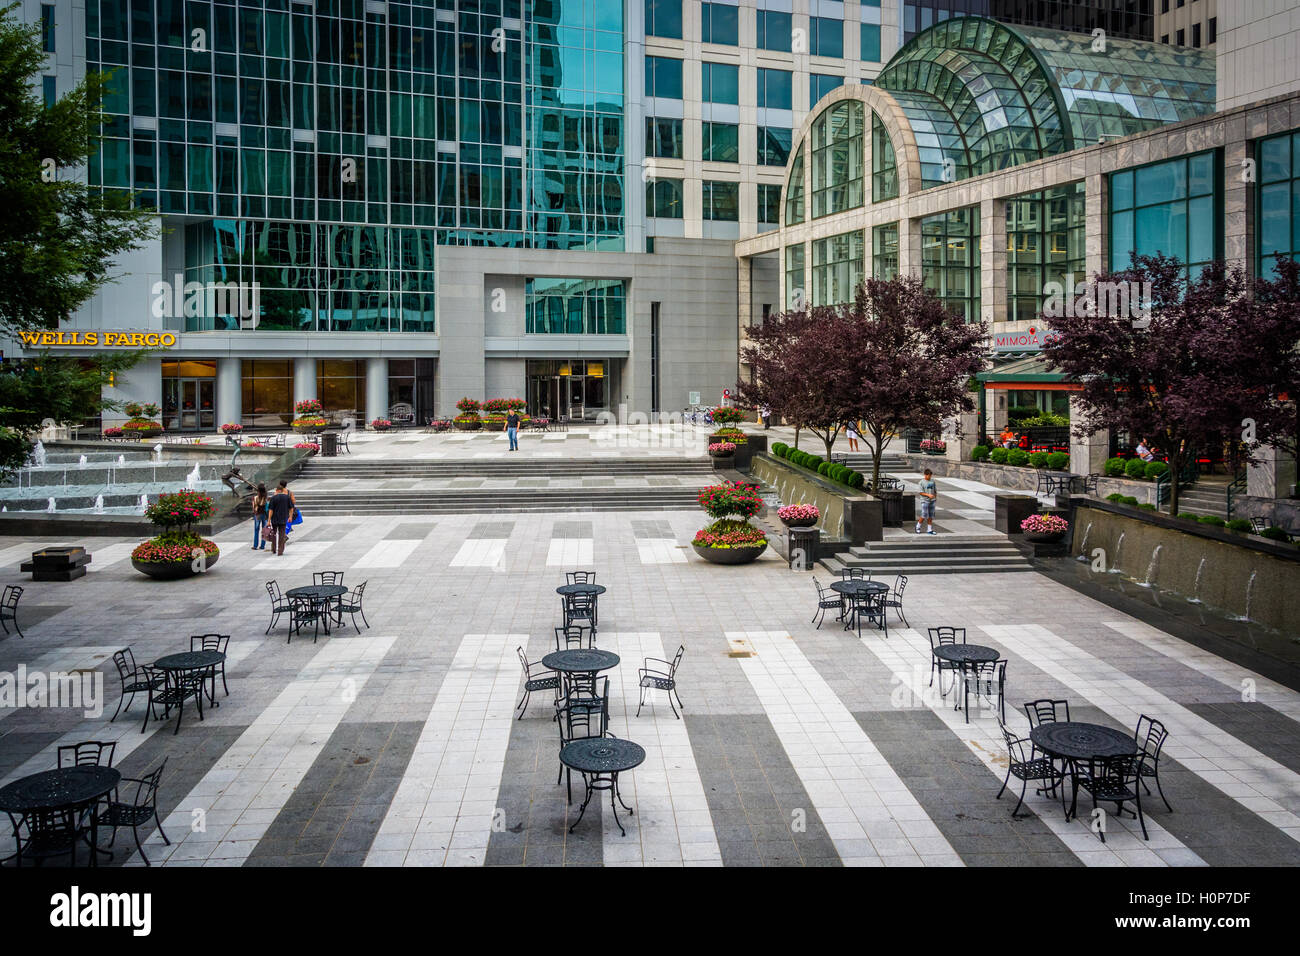 Courtyard and modern buildings in Uptown Charlotte, North Carolina. Stock Photo